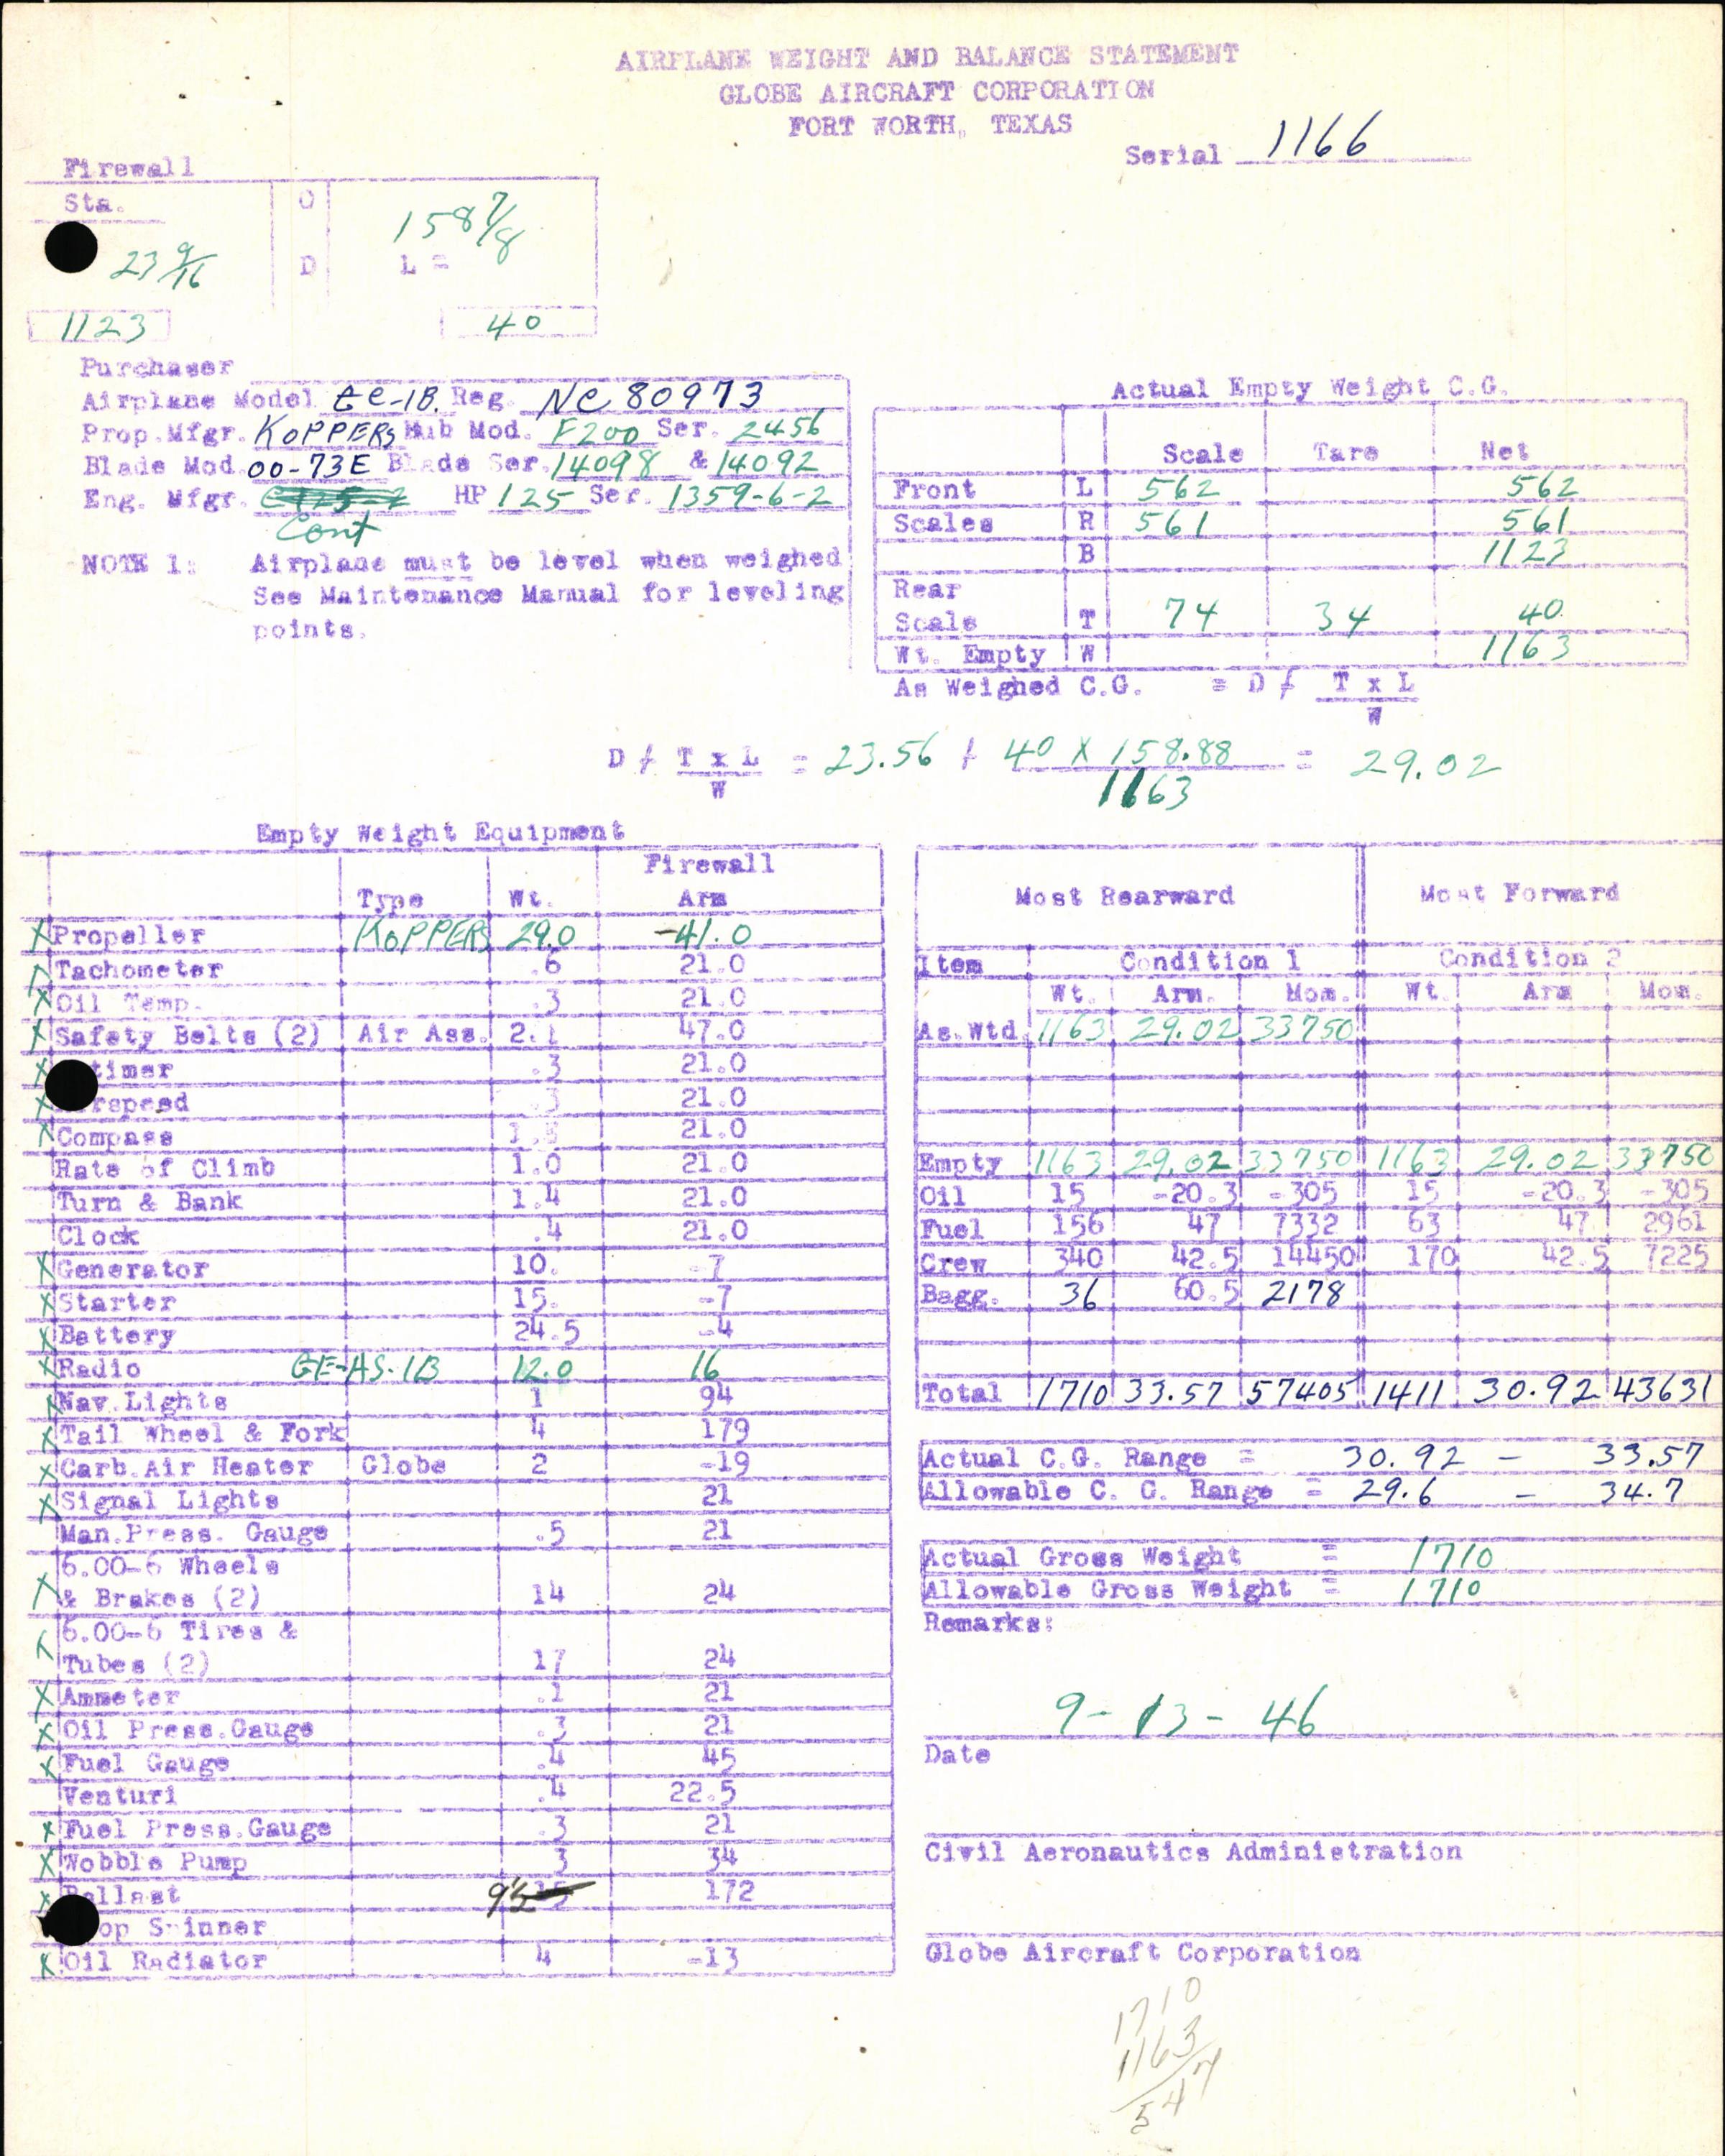 Sample page 5 from AirCorps Library document: Technical Information for Serial Number 1166